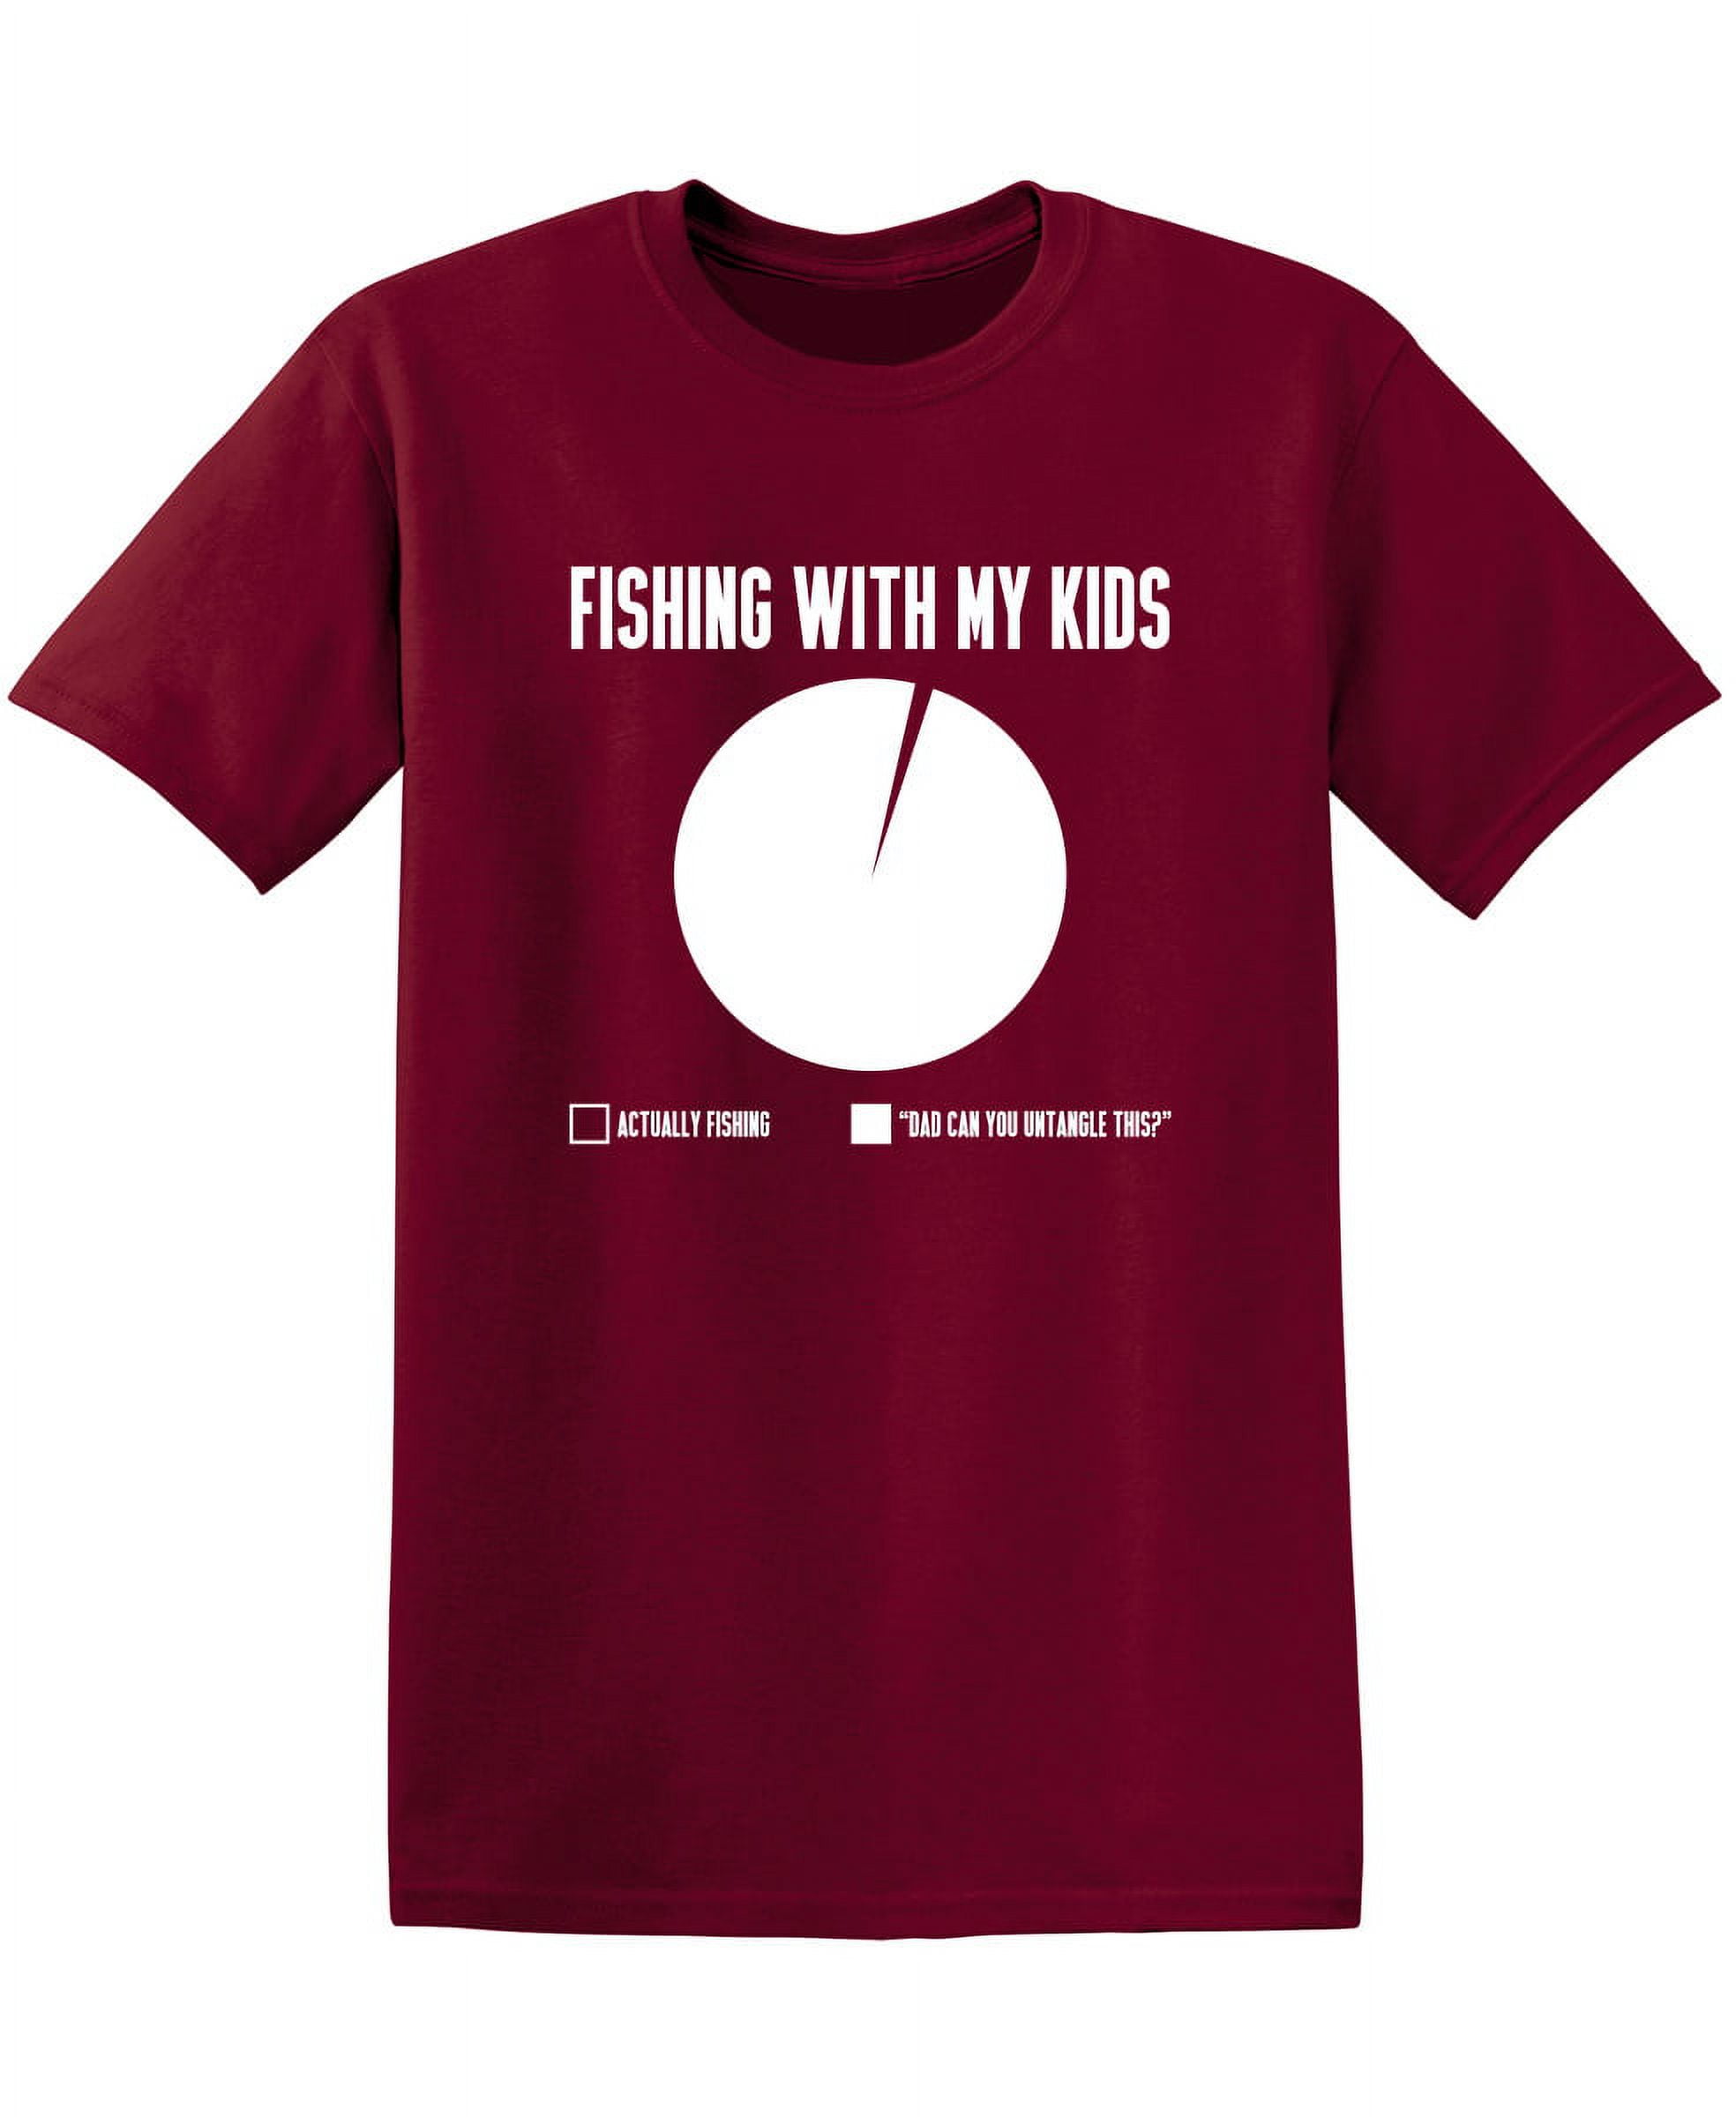 Fishing With My Kids Sarcastic Premium T Shirt Adult Humor Funny Saying  Graphic Tee For Xmas Pre Birthday Anniversary Gift Hilarious Novelty Tshirt